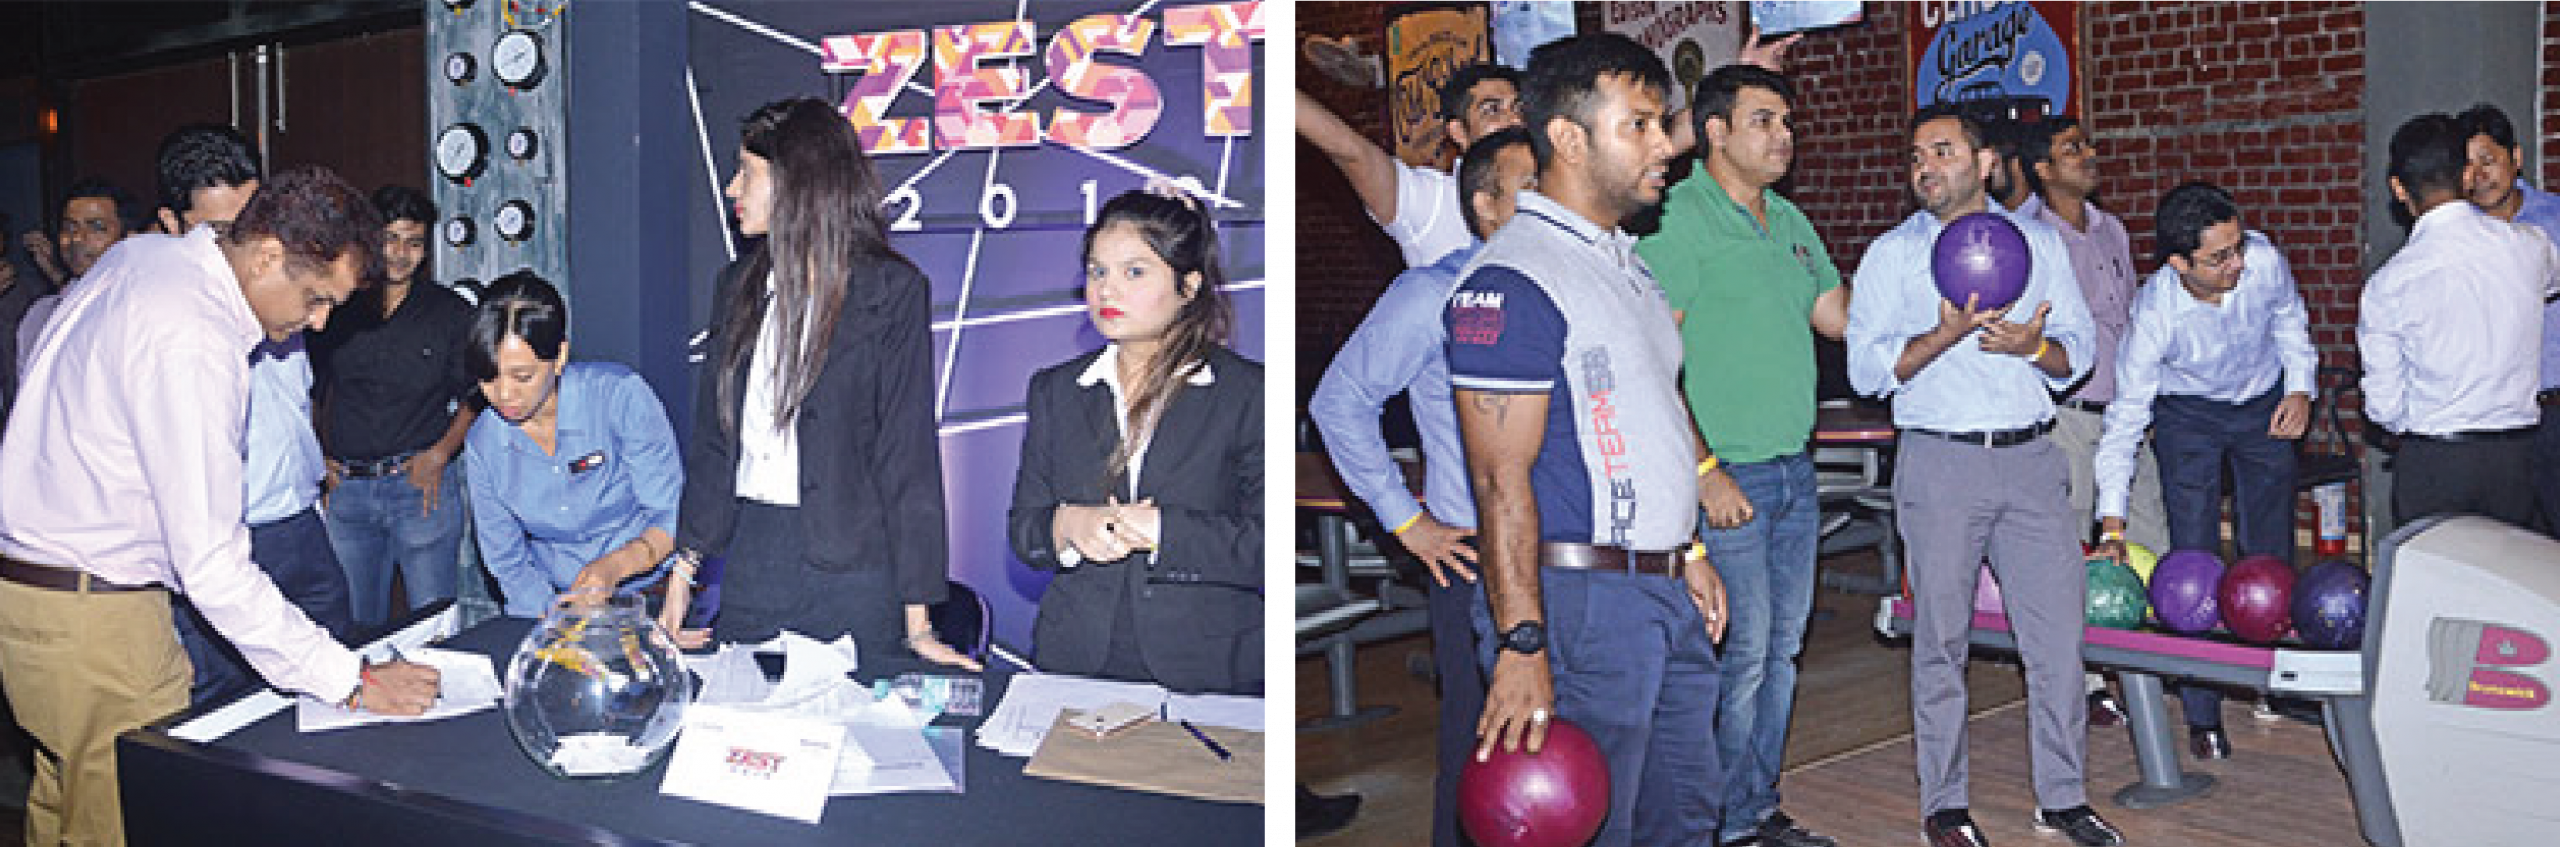 Welcoming guests at the event & Team bowling competition under way - Candor TechSpace